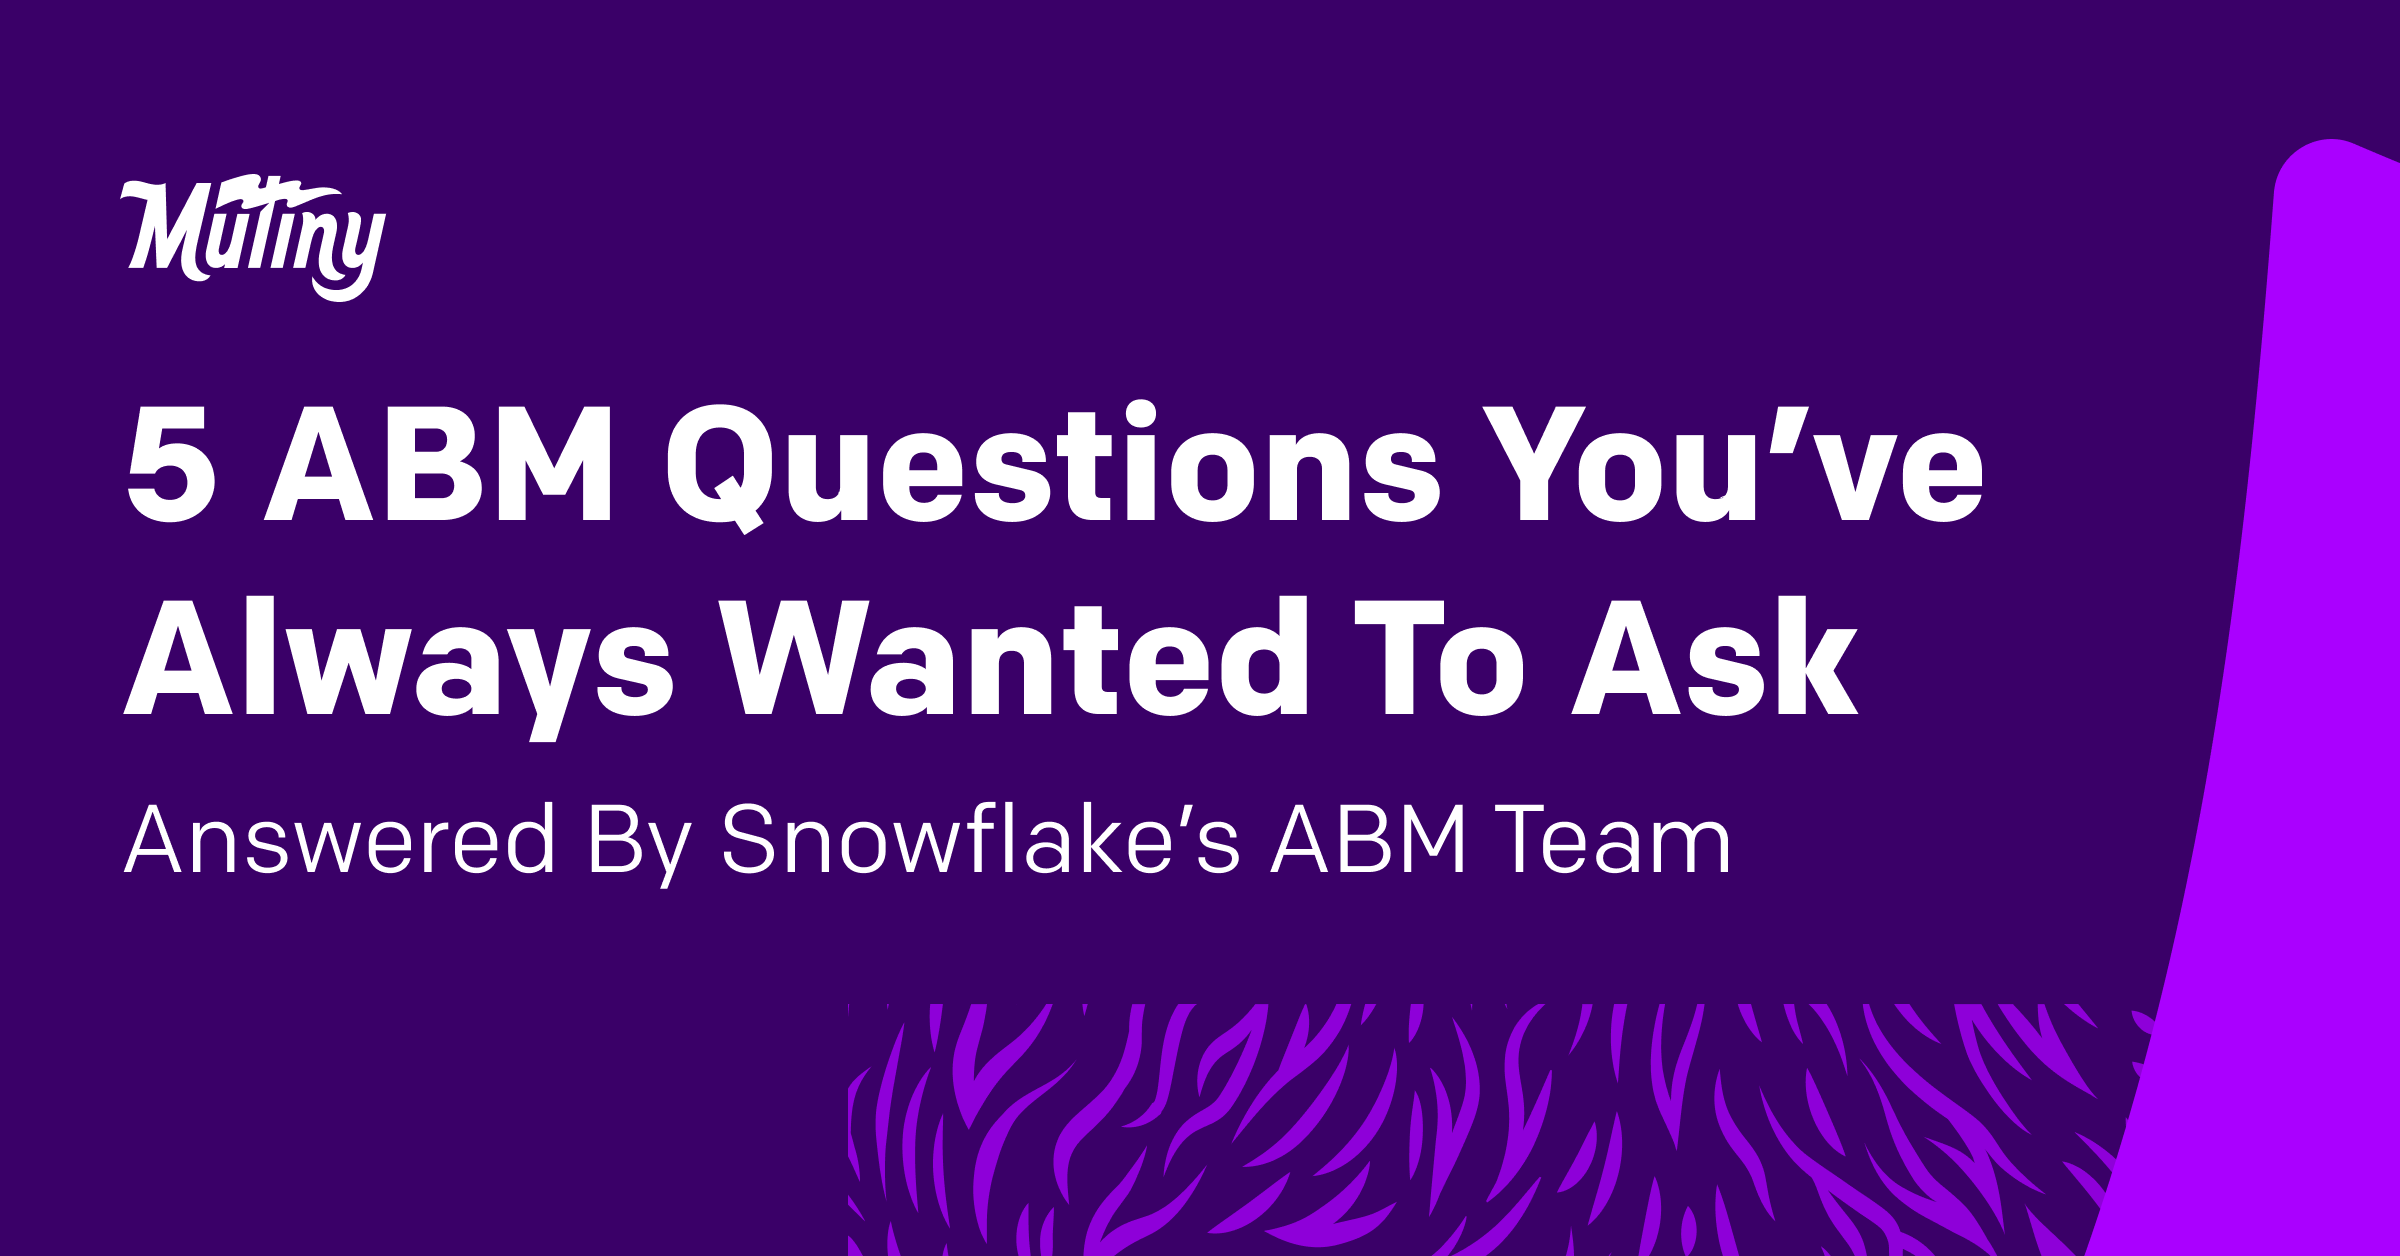 5 ABM Questions You’ve Always Wanted To Ask, Answered By Snowflake's ABM Team